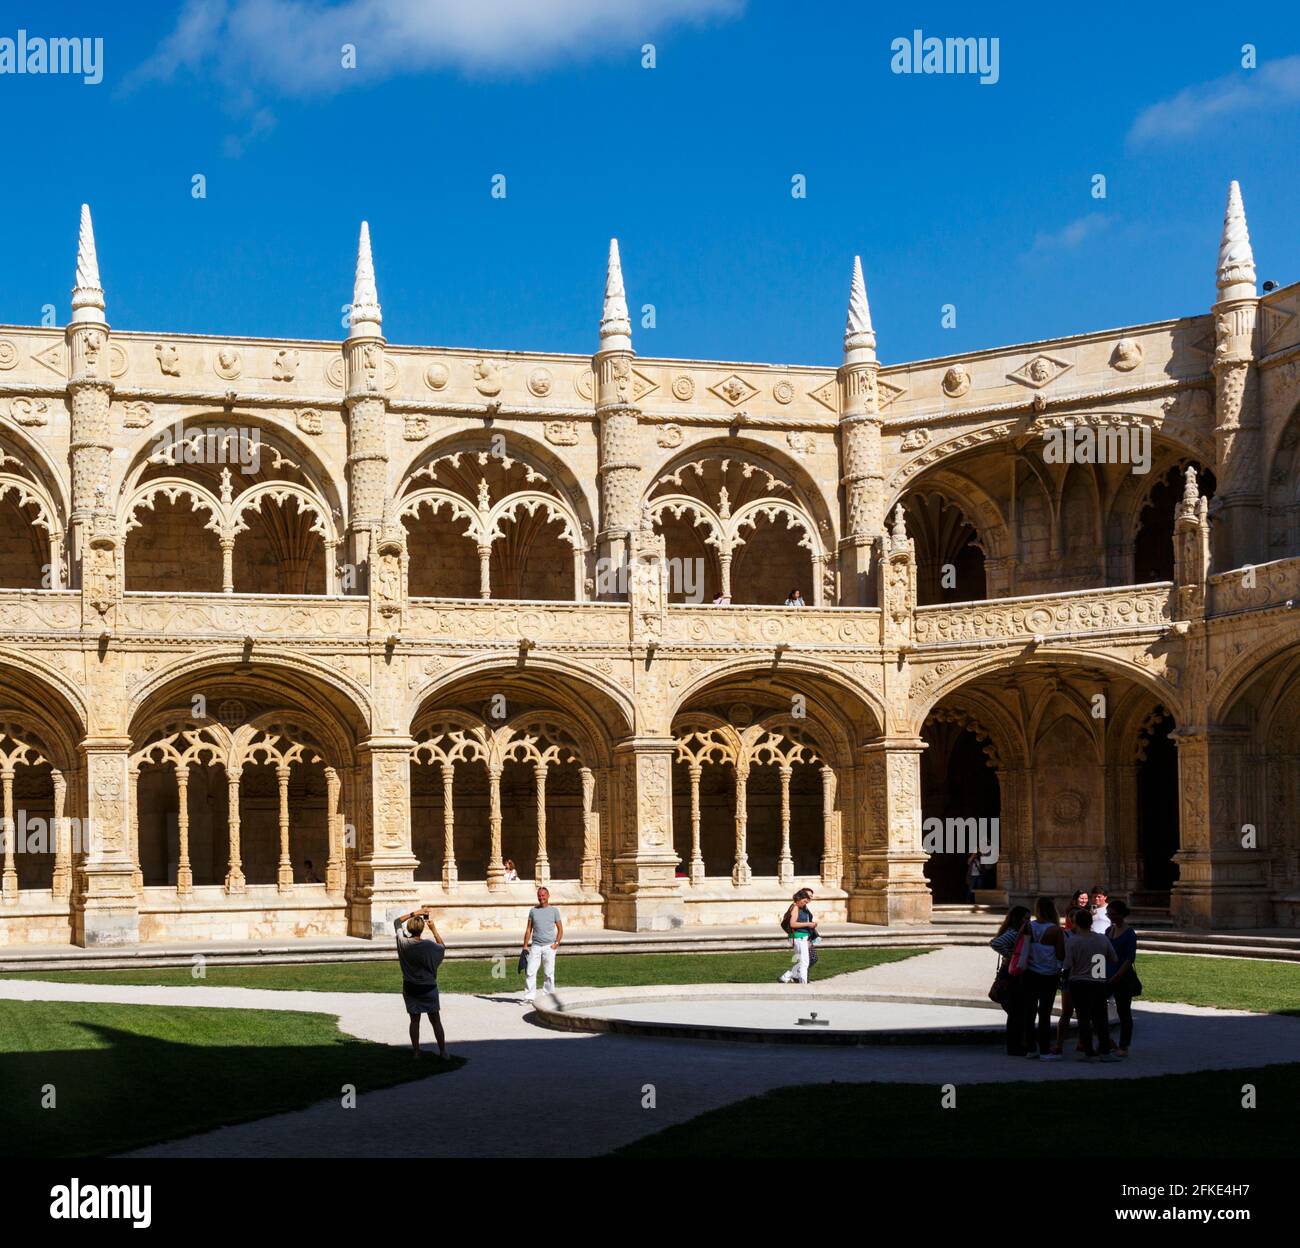 Lisbon, Portugal. The cloister and courtyard of the Mosteiro dos Jeronimos, or the Monastery of the Hieronymites. The monastery is considered a triump Stock Photo